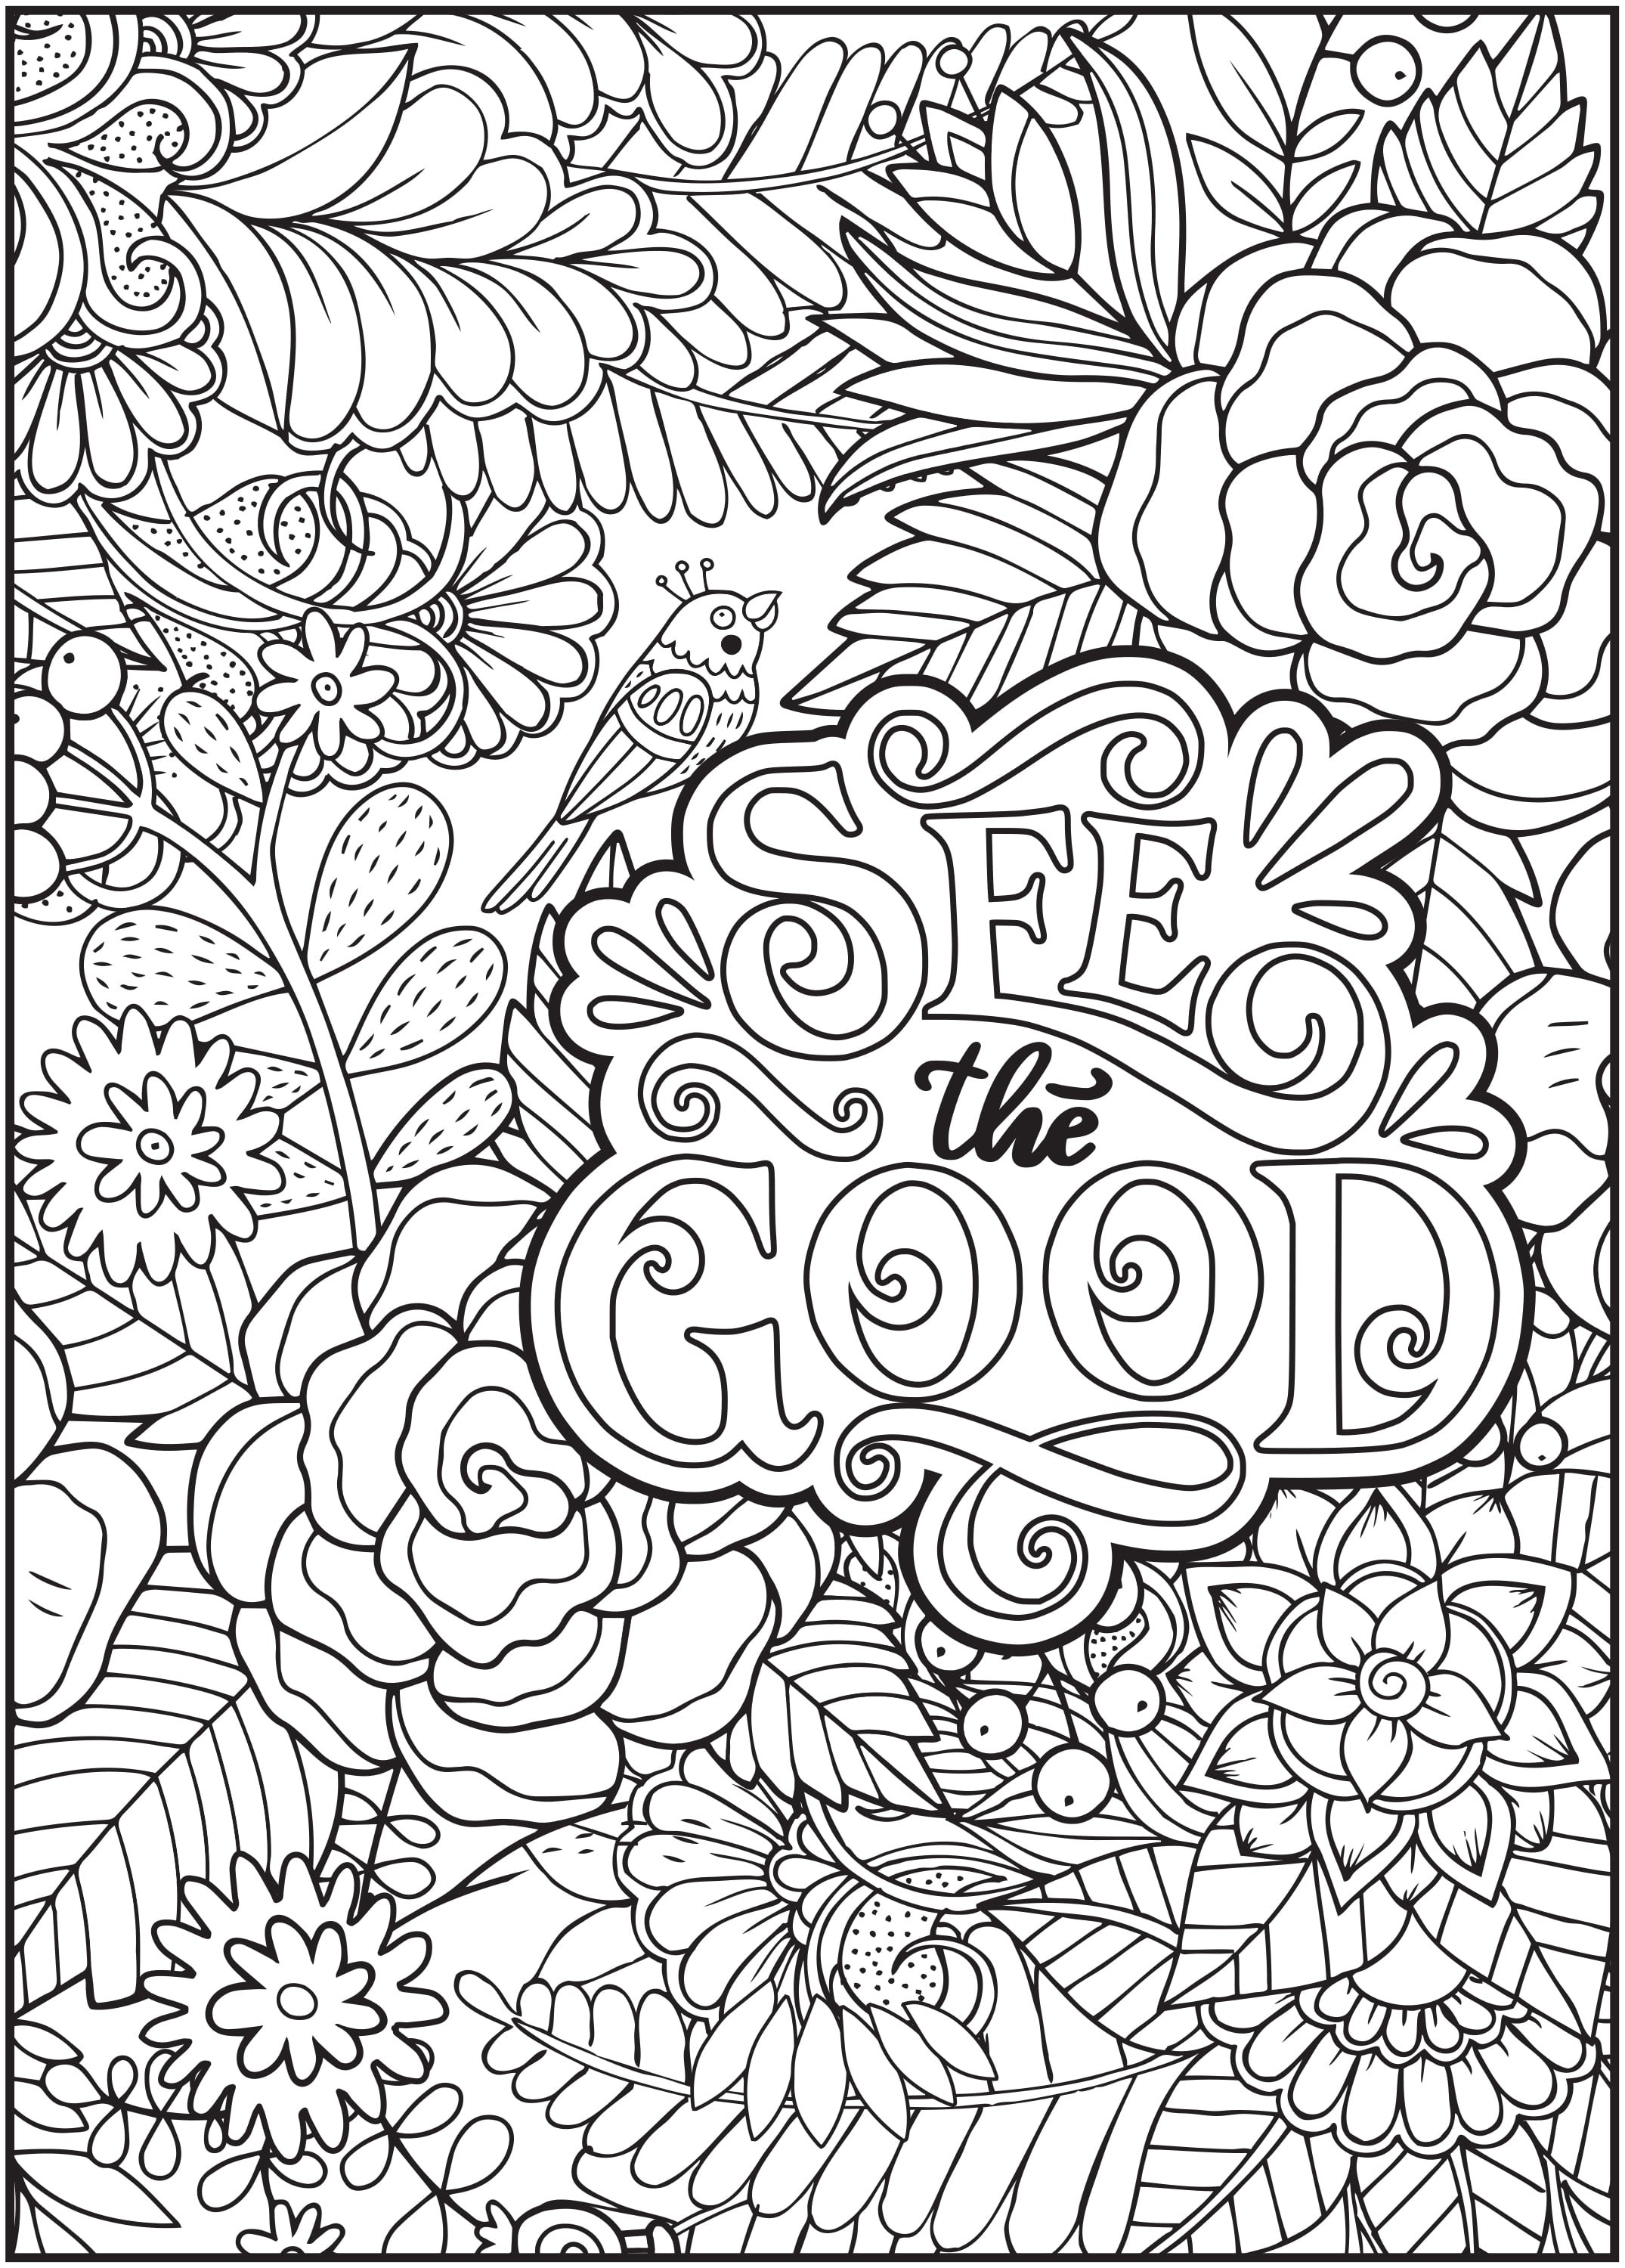 The Beautiful Word Adult Coloring Book: Creative Coloring and Hand